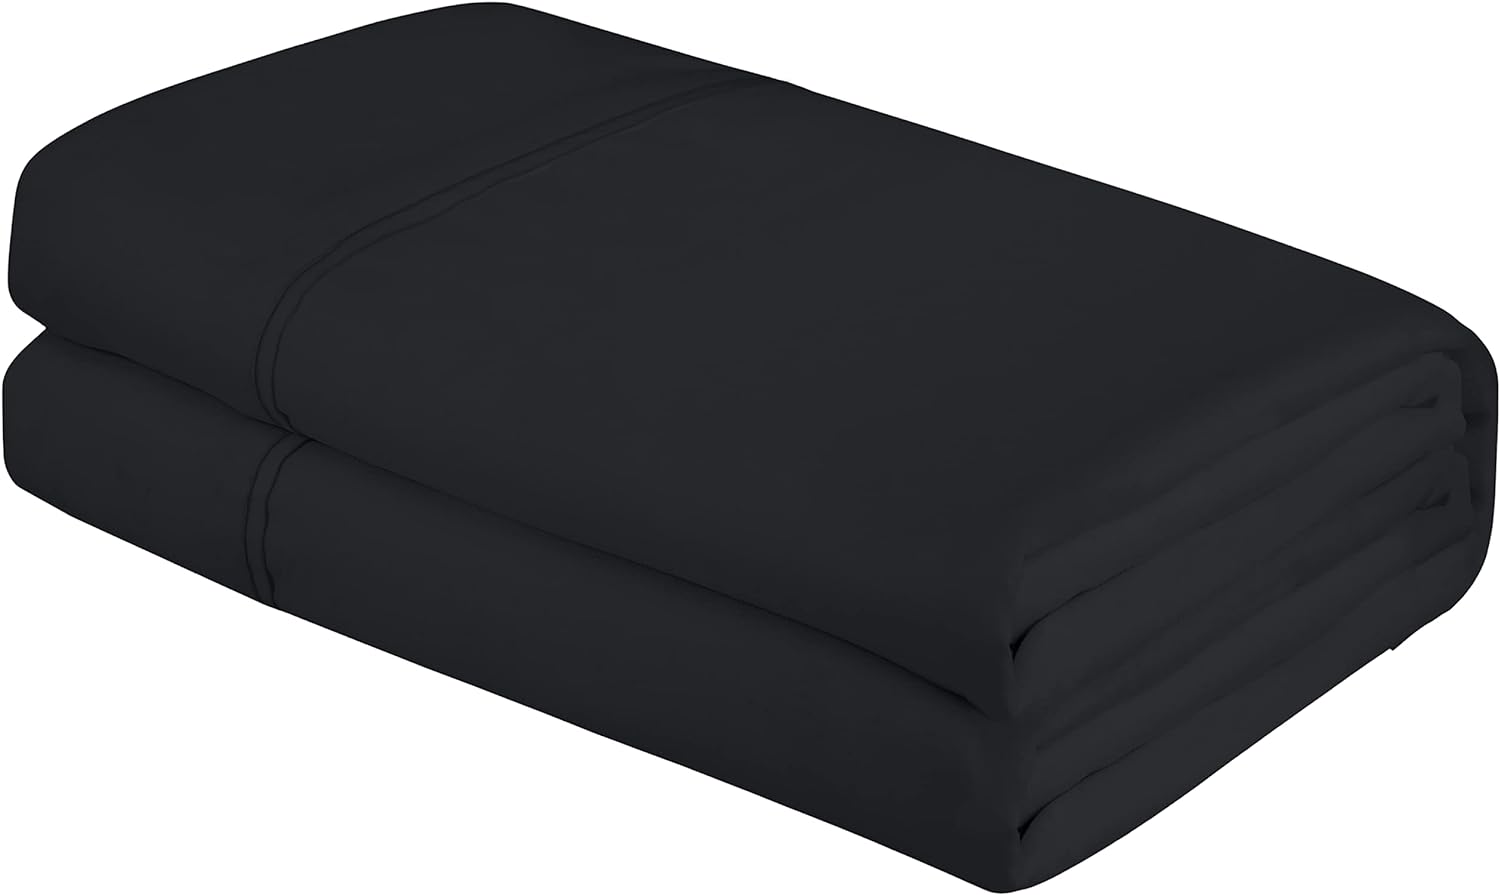 Royale Linens Twin Size Flat Sheet Only - Brushed 1800 Microfiber - Ultra Soft & Breathable - Wrinkle & Stain Resistant - Hotel Quality Flat Sheet Sold Separately - Top Sheet for Bed - (Twin, Black)